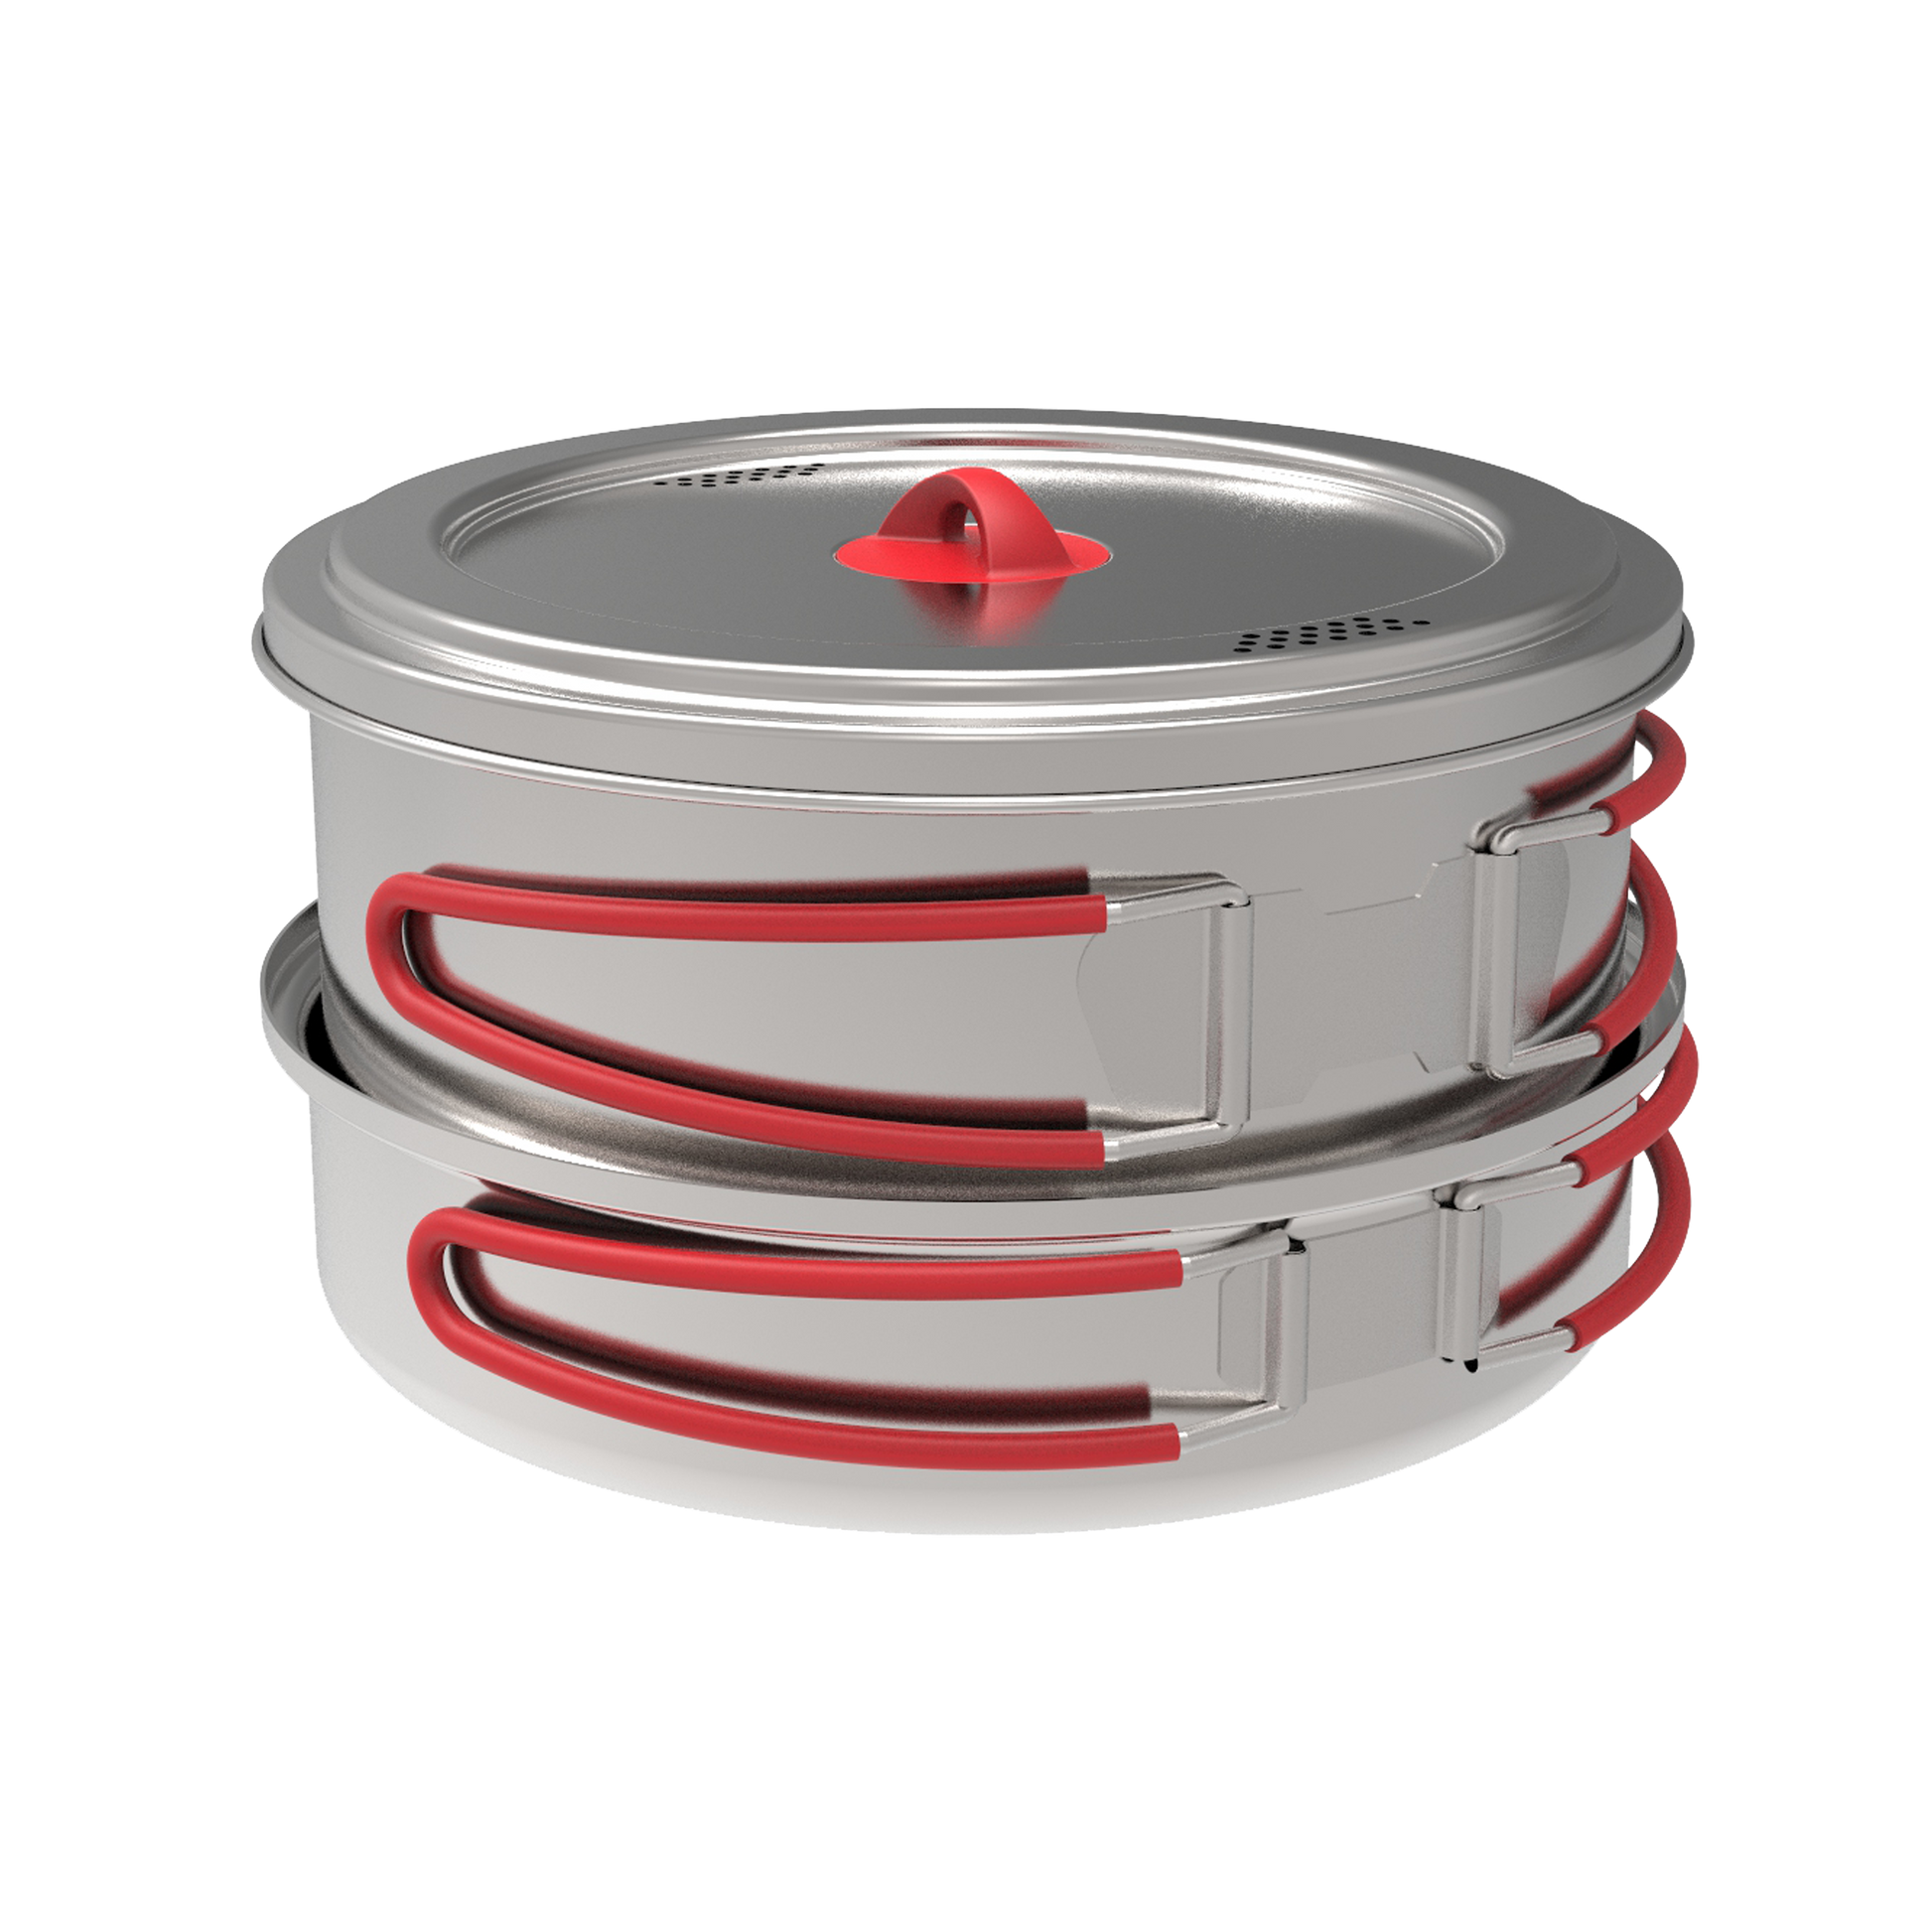 Food Storage Container with Snap-on Lid, Silicone, 21.6 oz